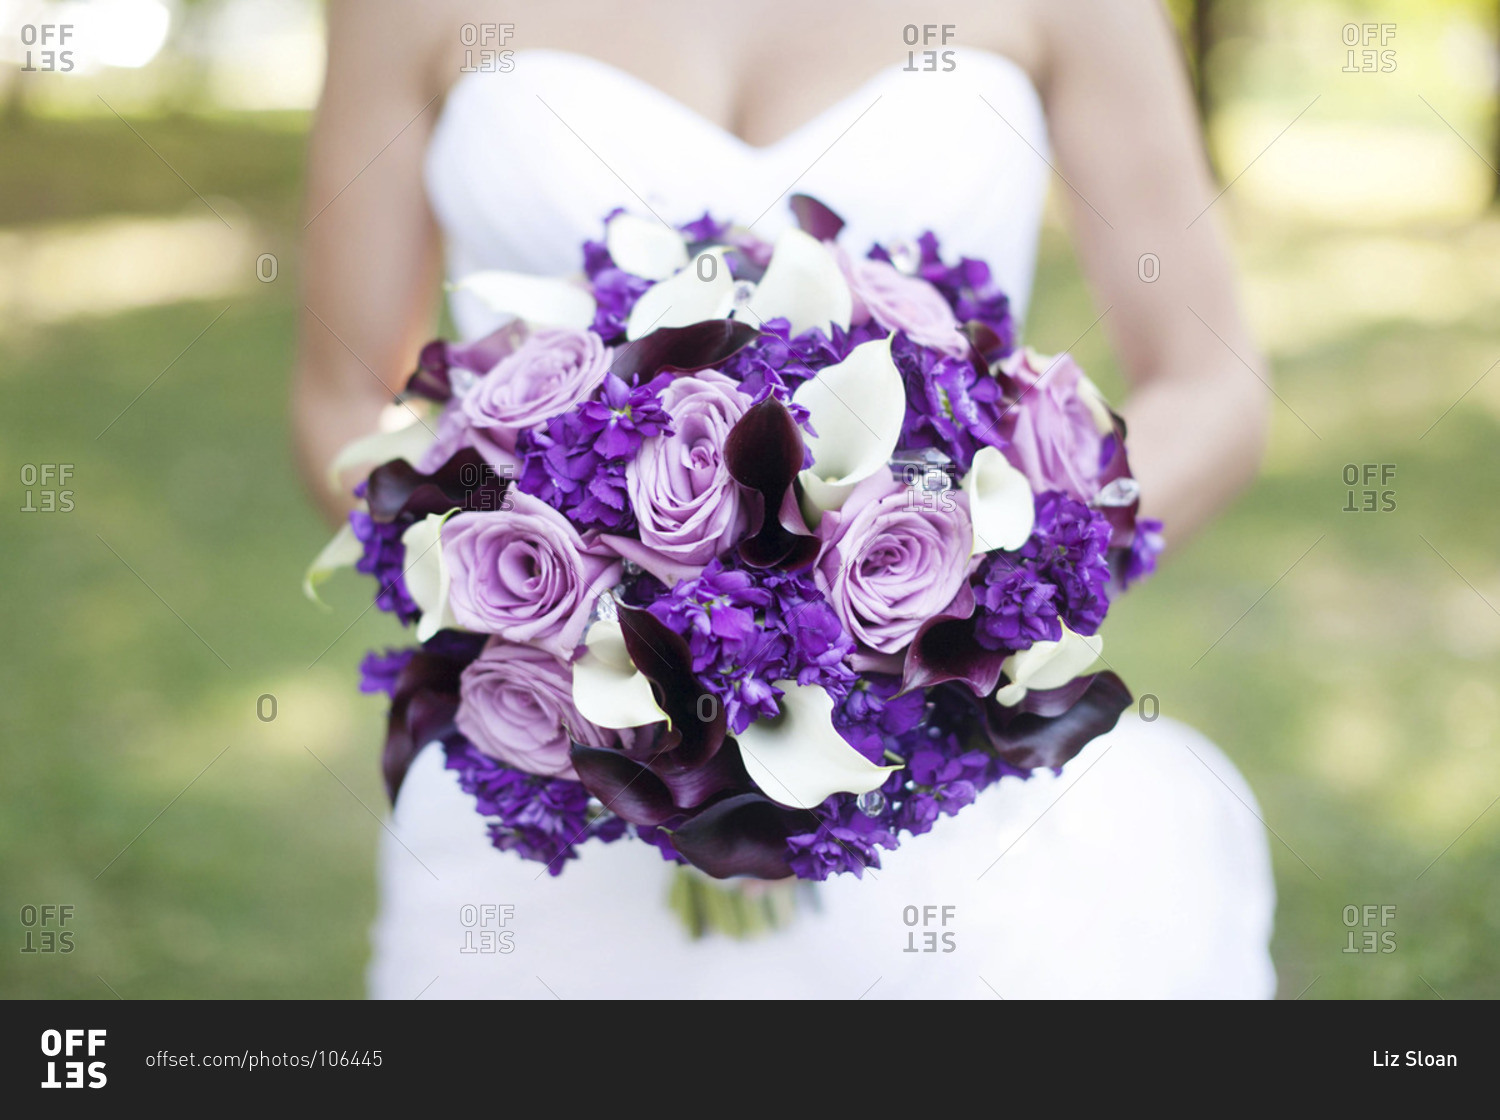 Mid section view of bride holding purple and white bridal bouquet